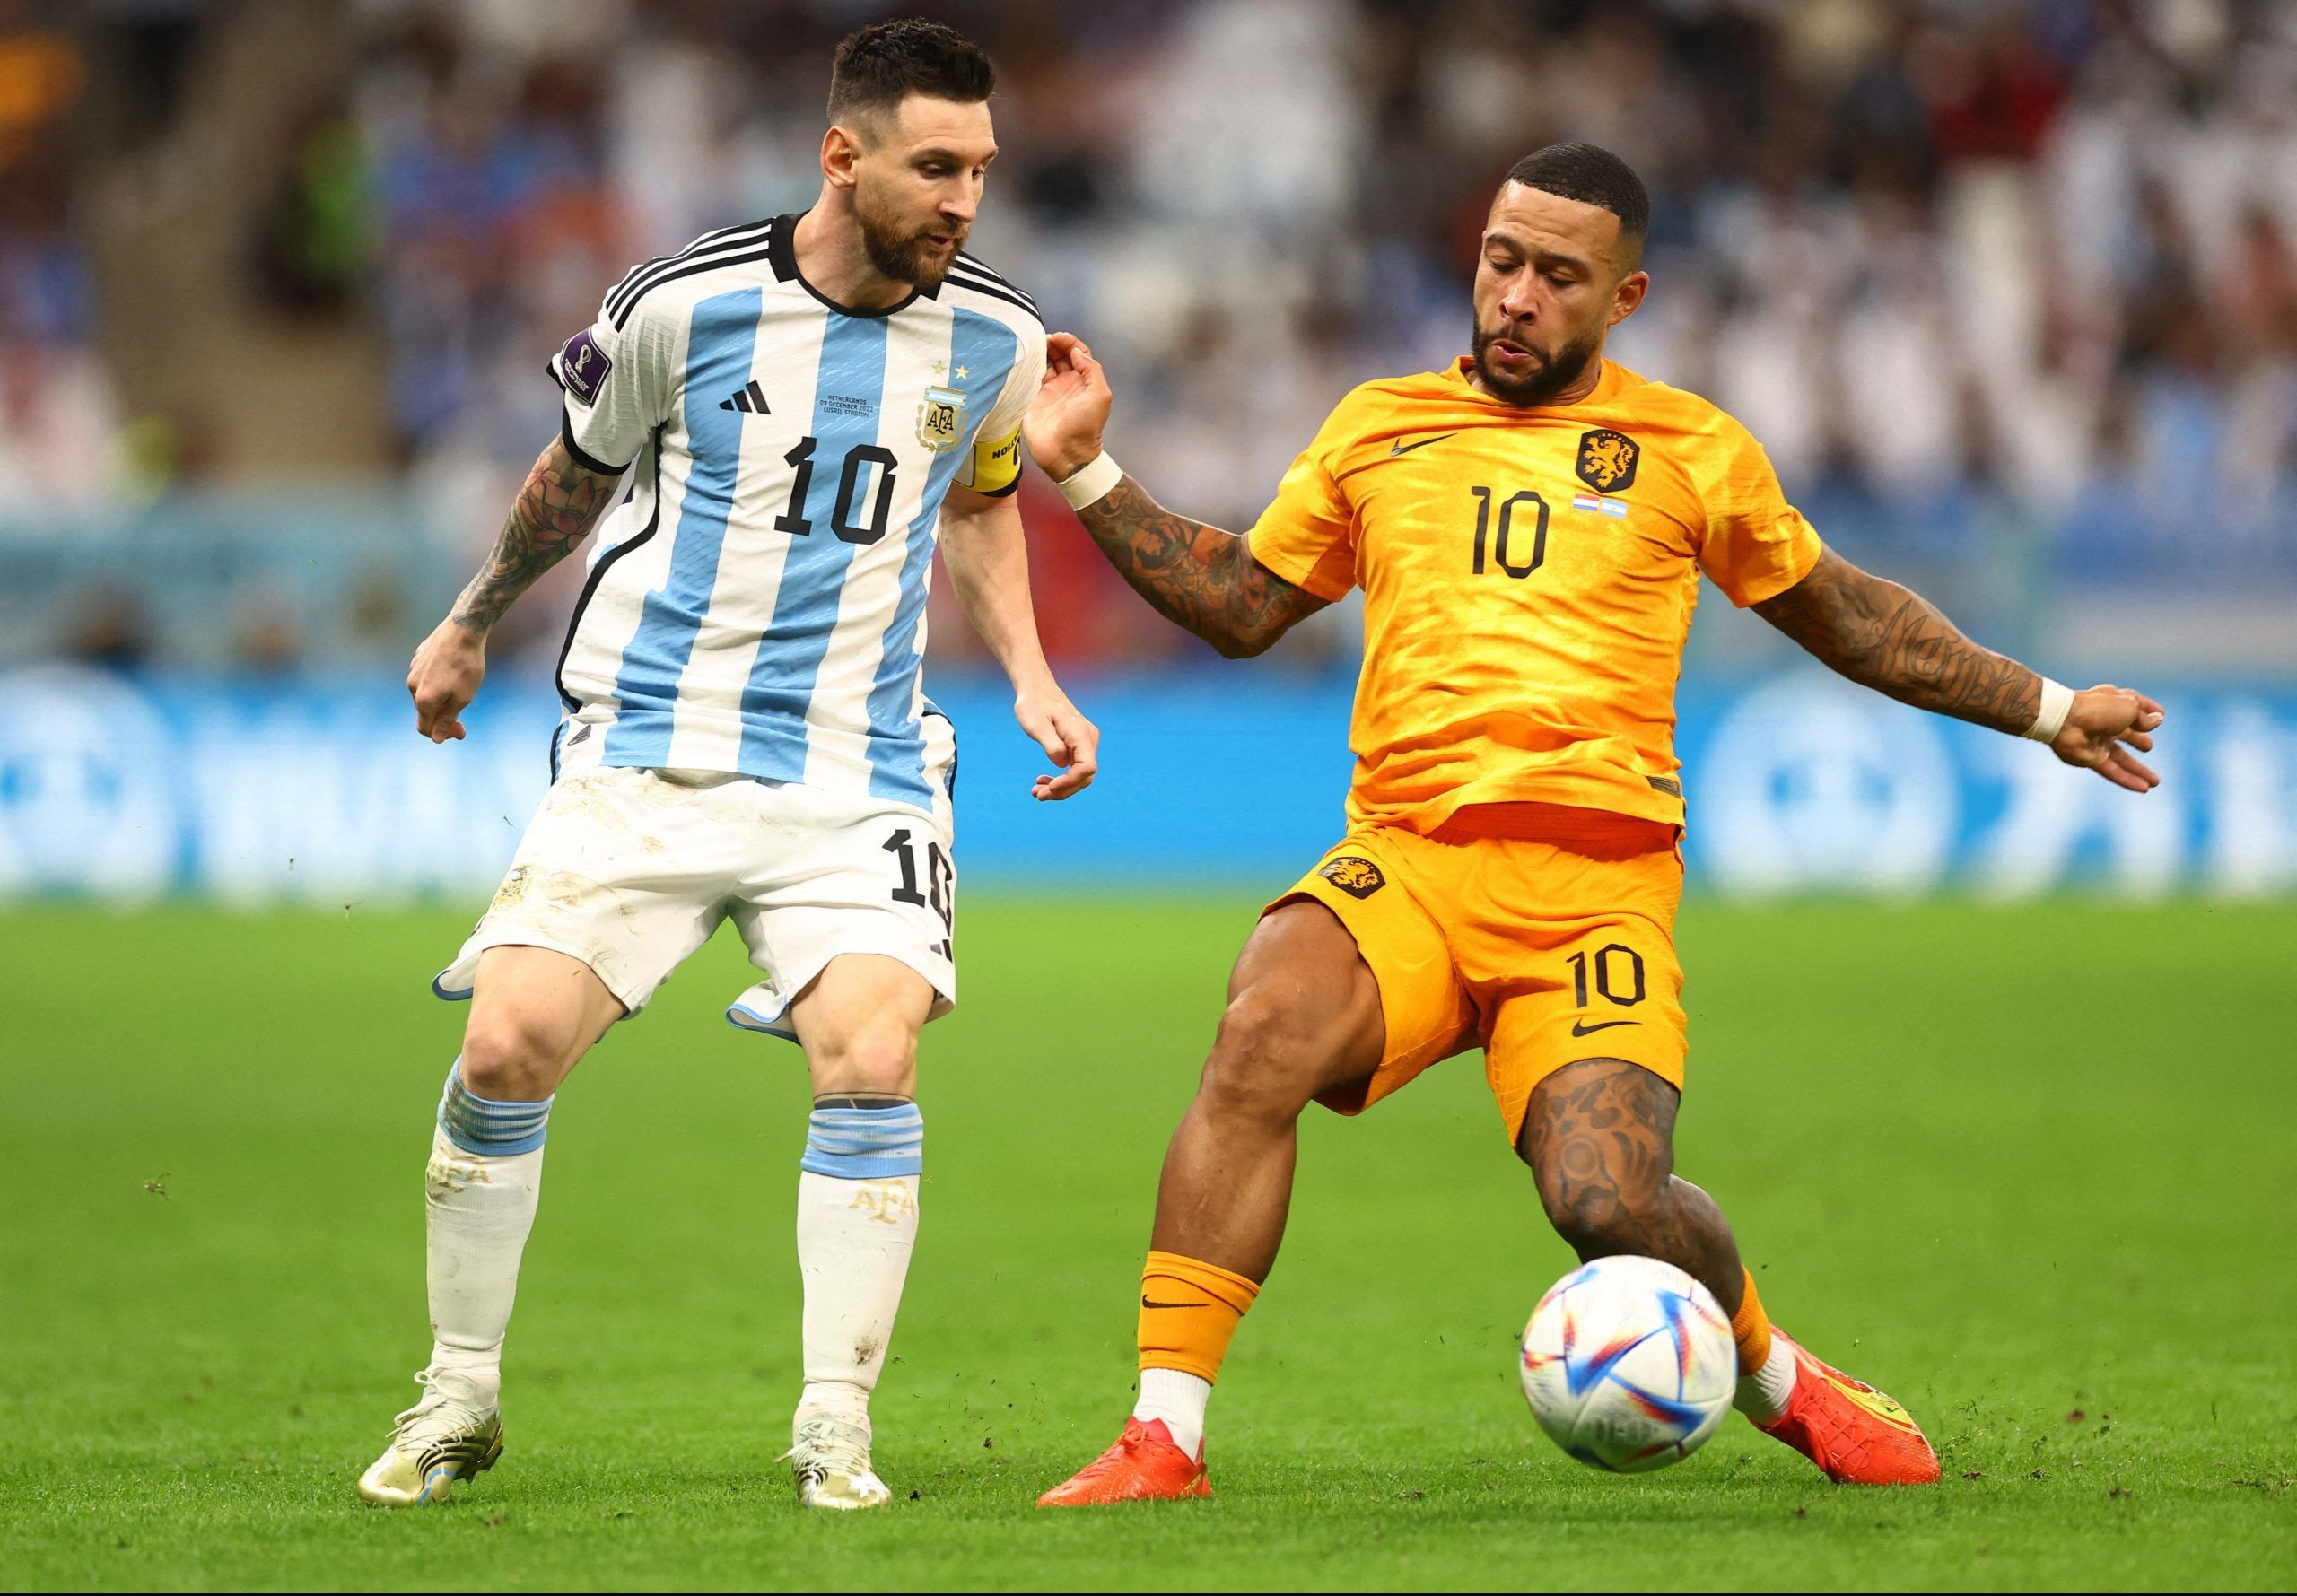 Soccer Football - FIFA World Cup Qatar 2022 - Quarter Final - Netherlands v Argentina - Lusail Stadium, Lusail, Qatar - December 9, 2022  Argentina's Lionel Messi in action with  Netherlands' Memphis Depay REUTERS/Carl Recine